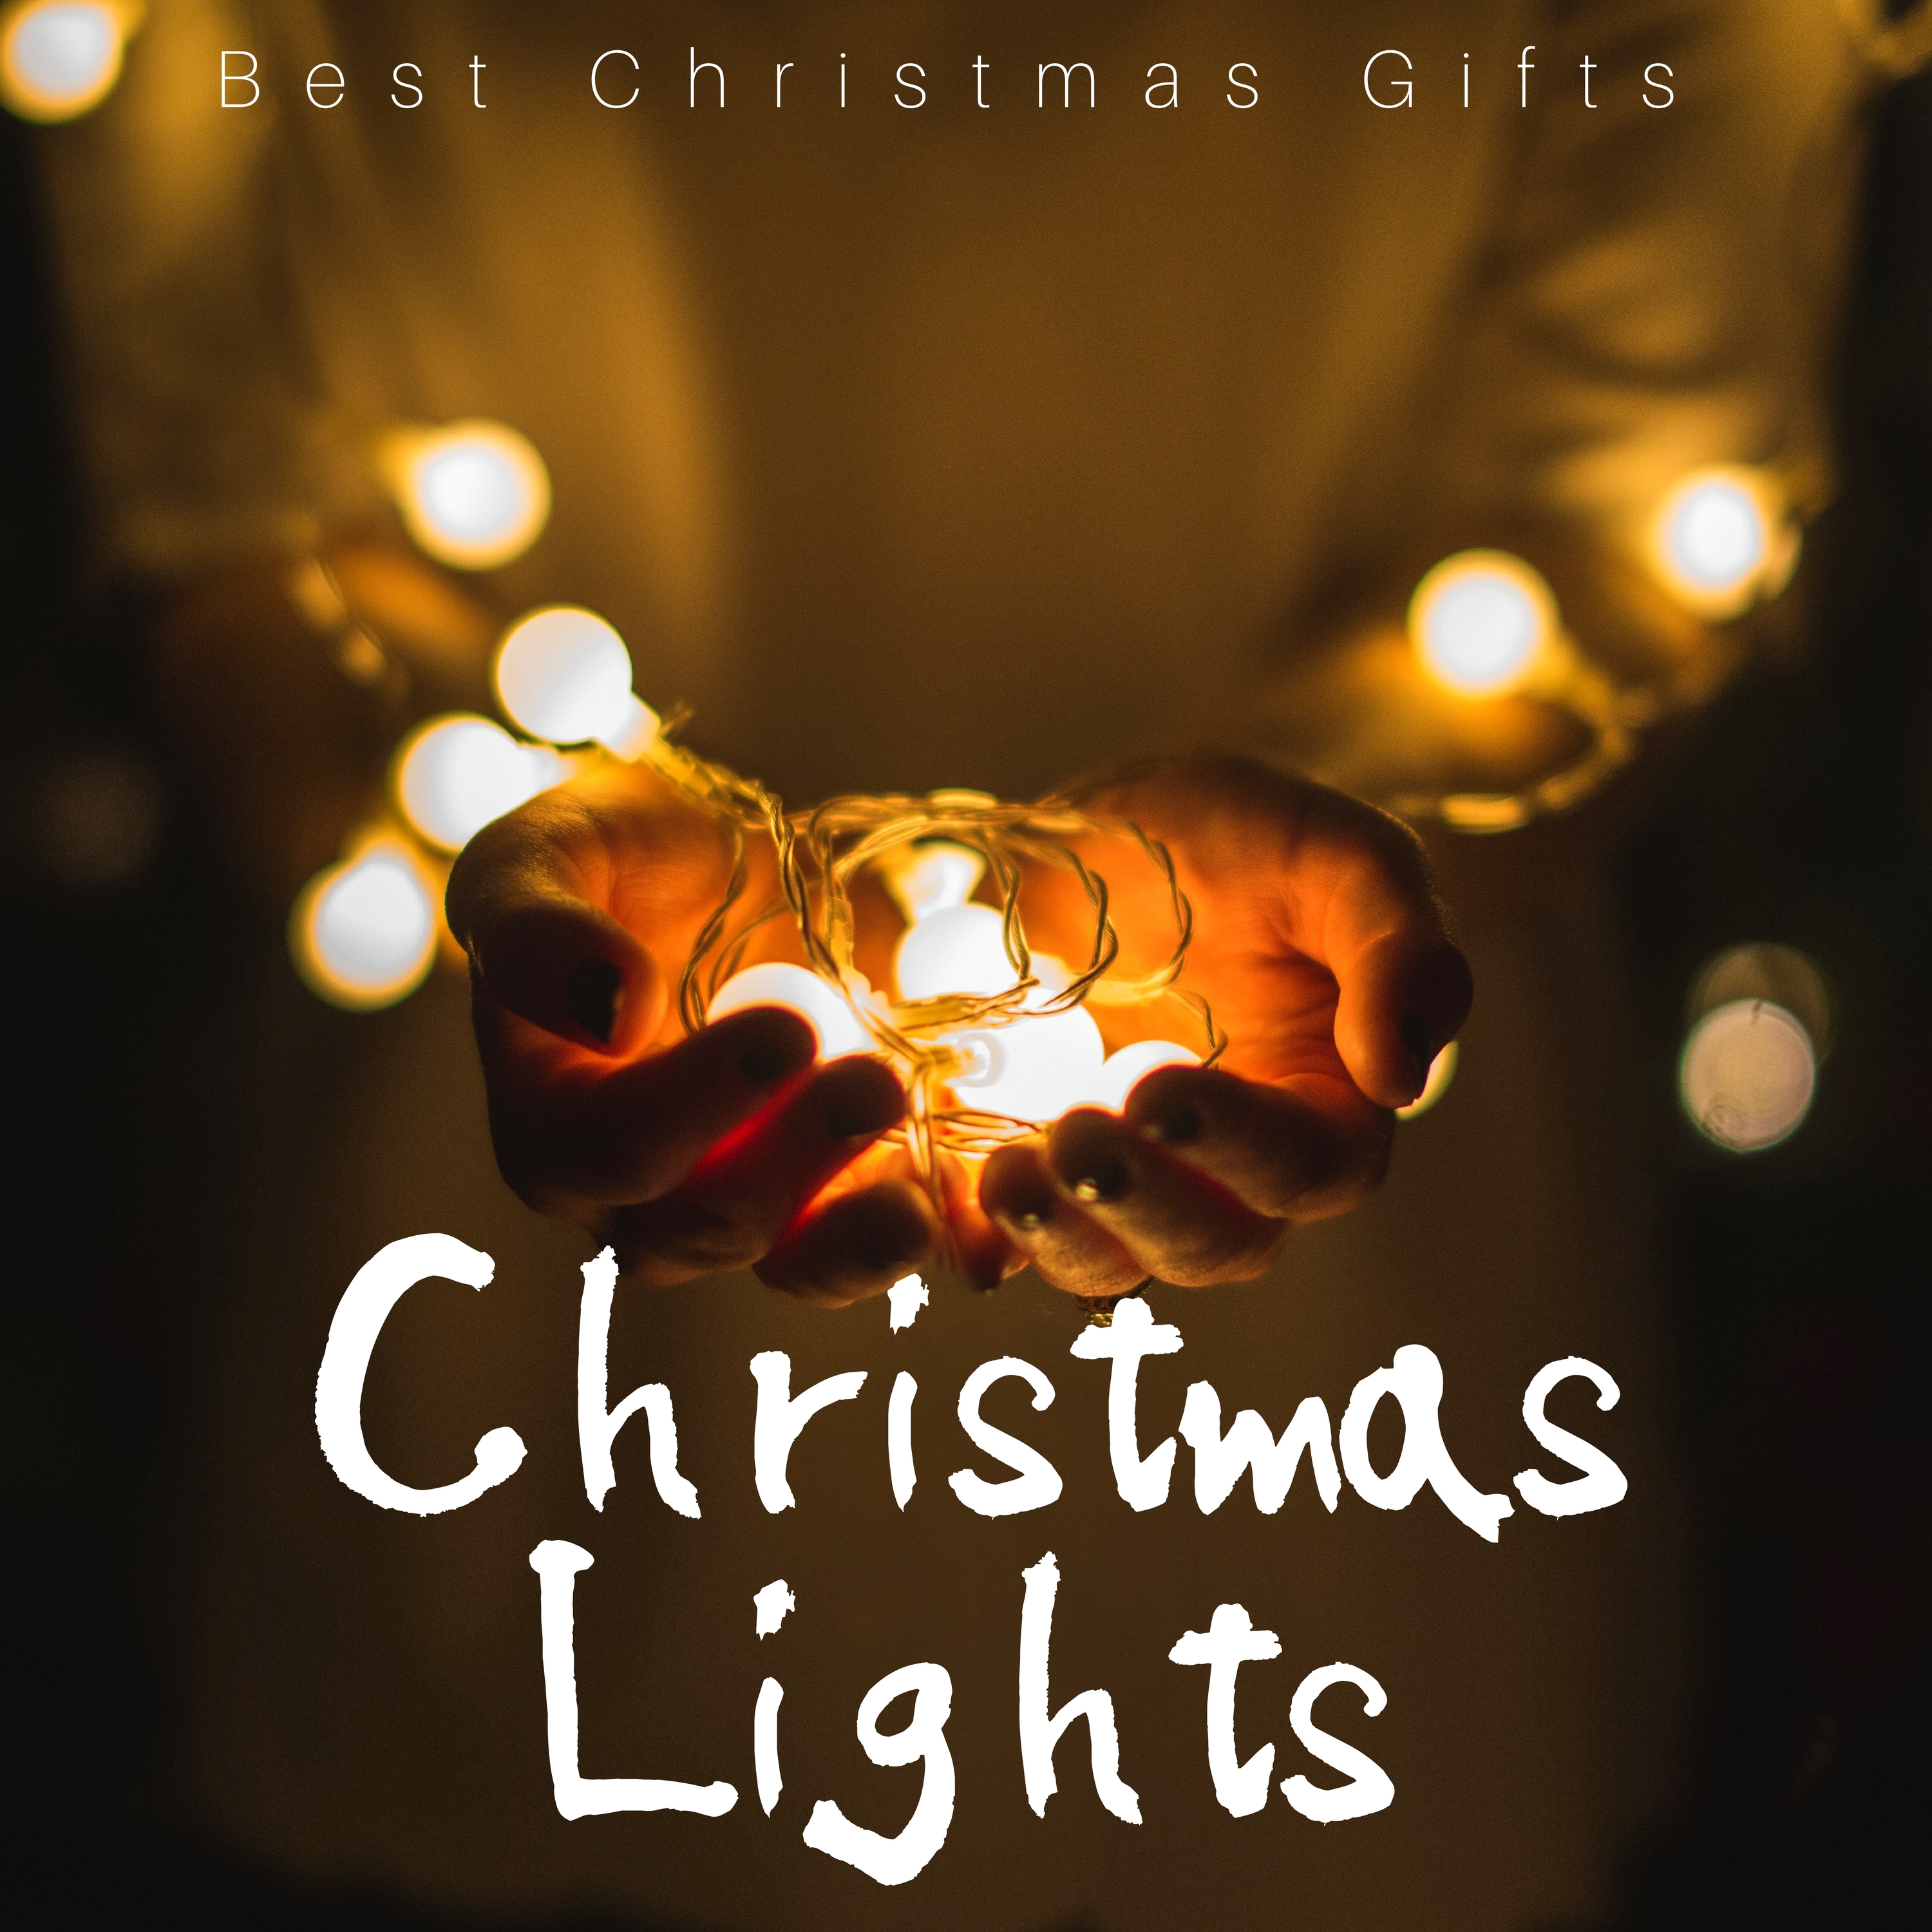 Christmas Lights: Best Christmas Gifts, Instrumental and Traditional Music, Slow Down Time for Good Xmas